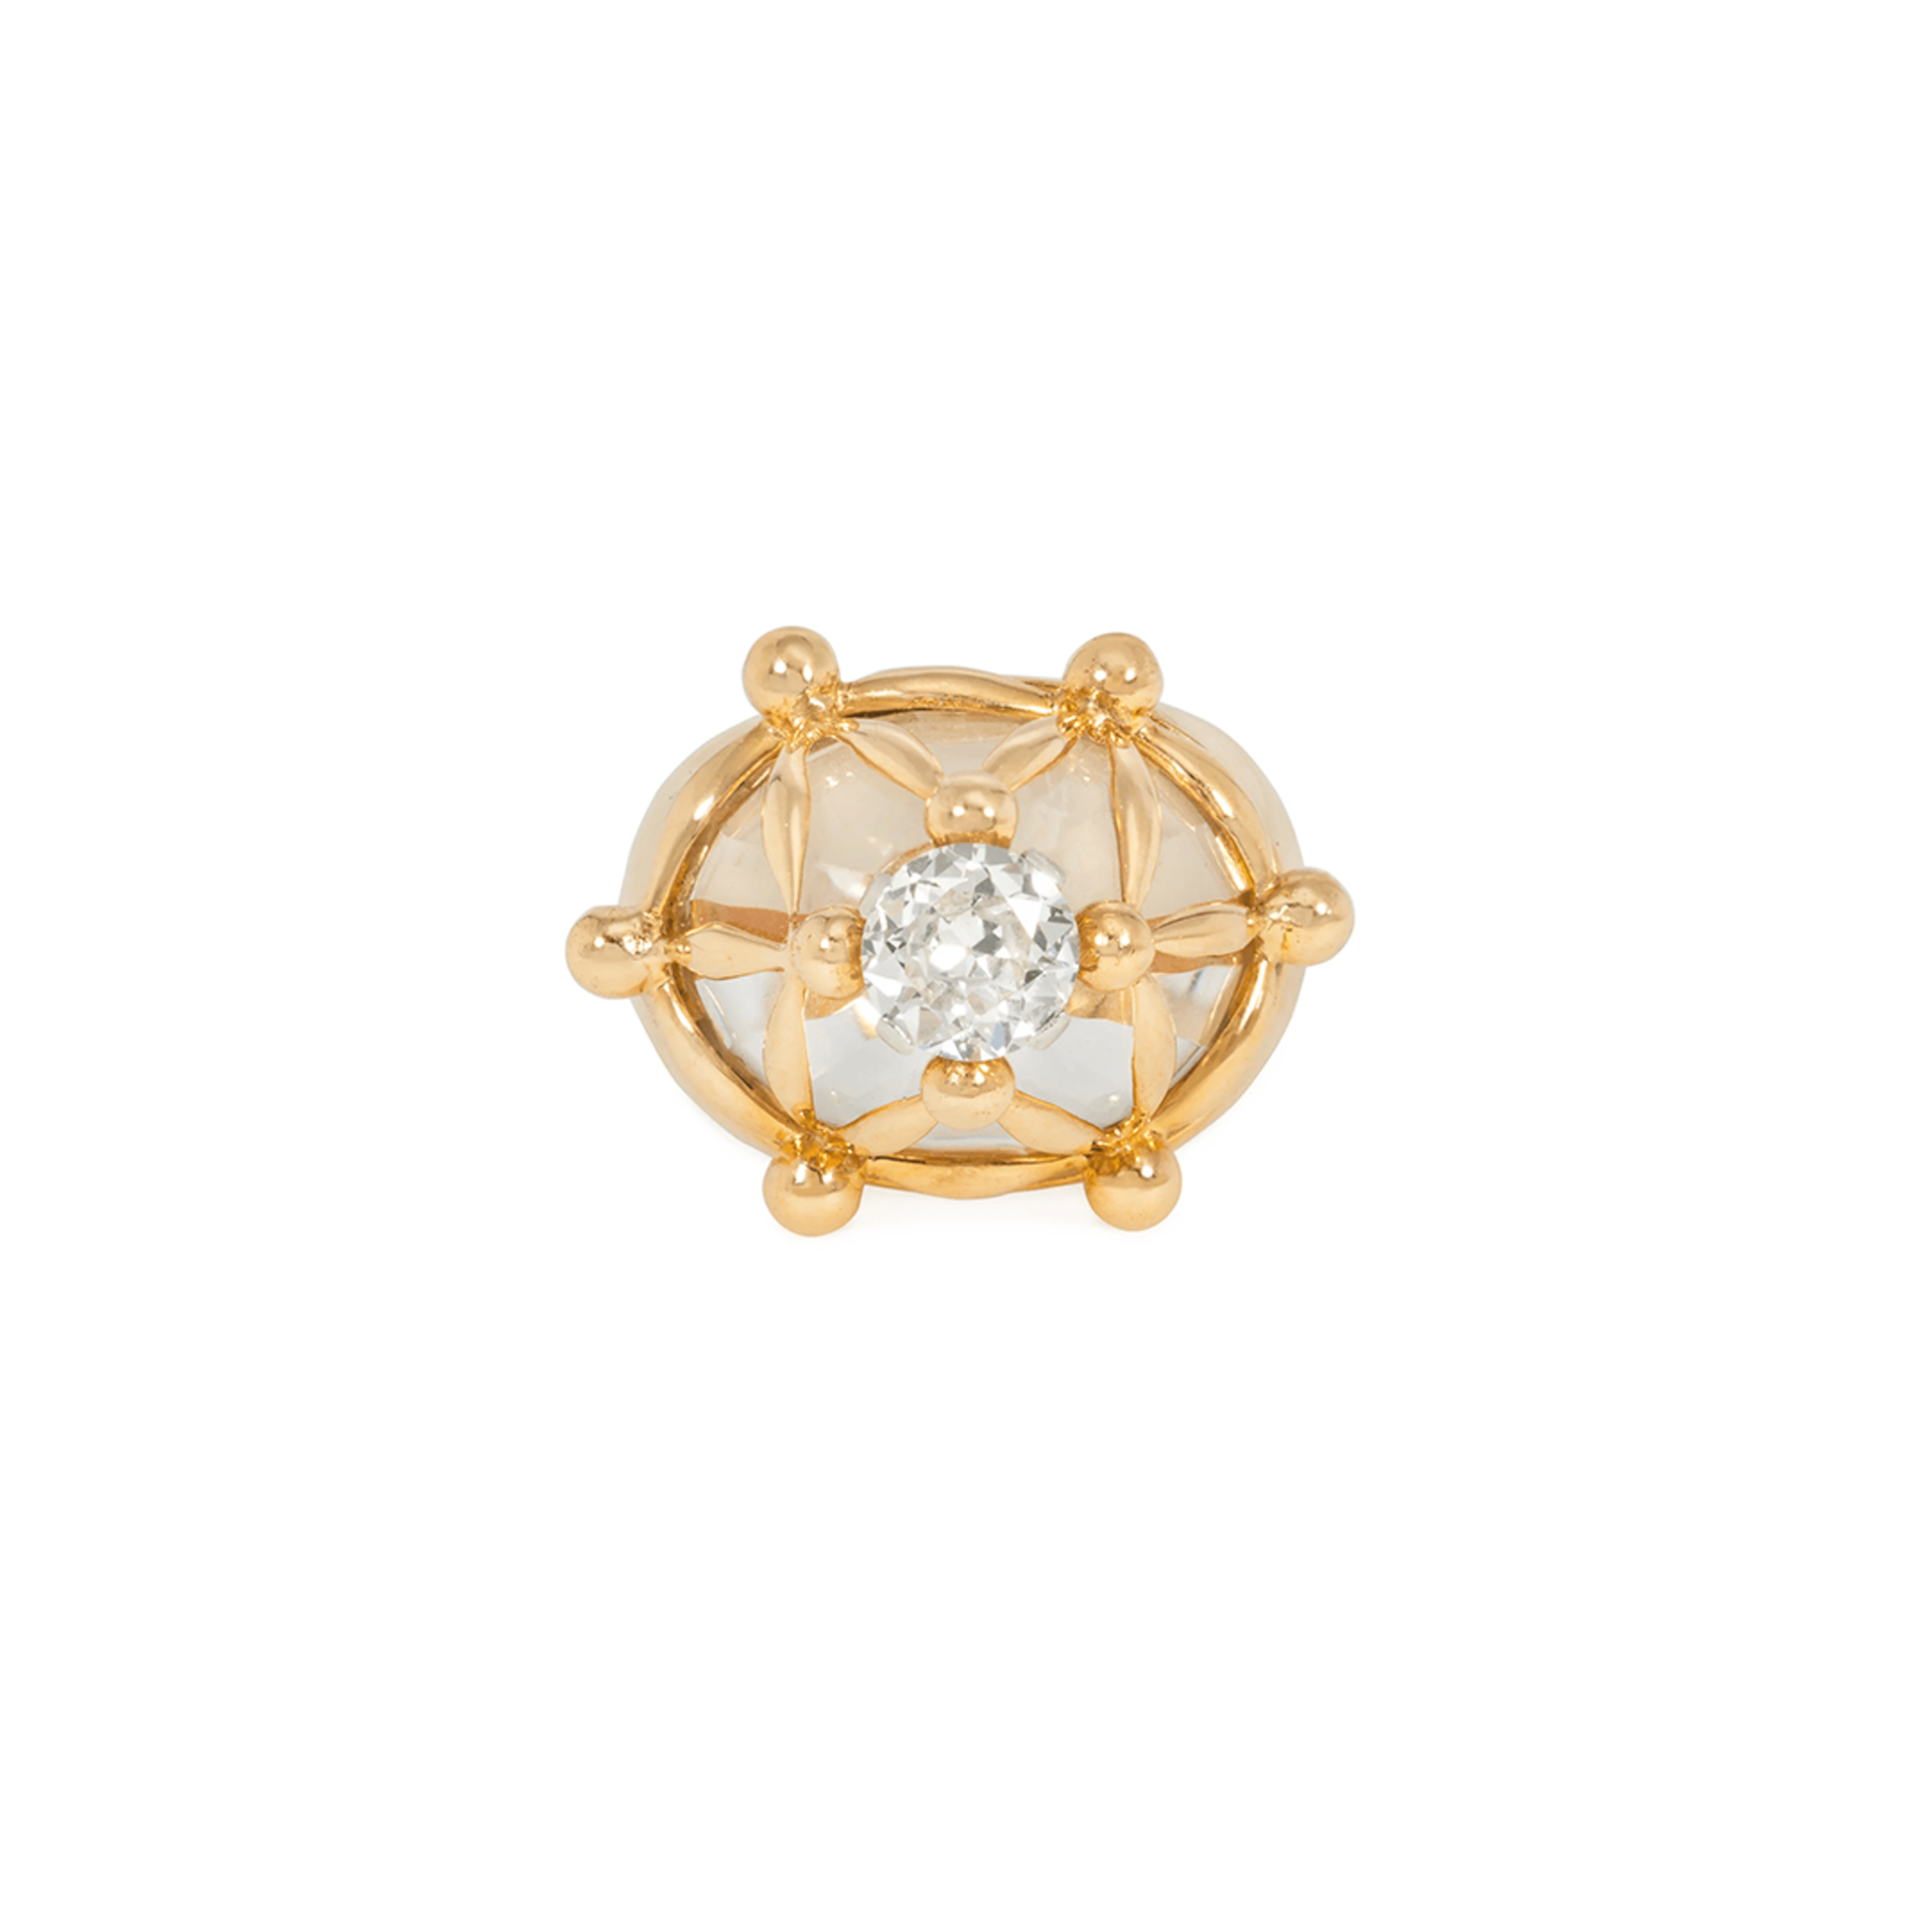 Raymond Topet French 1960s Platinum & 18KT Yellow Gold Diamond & Rock Crystal Ring front